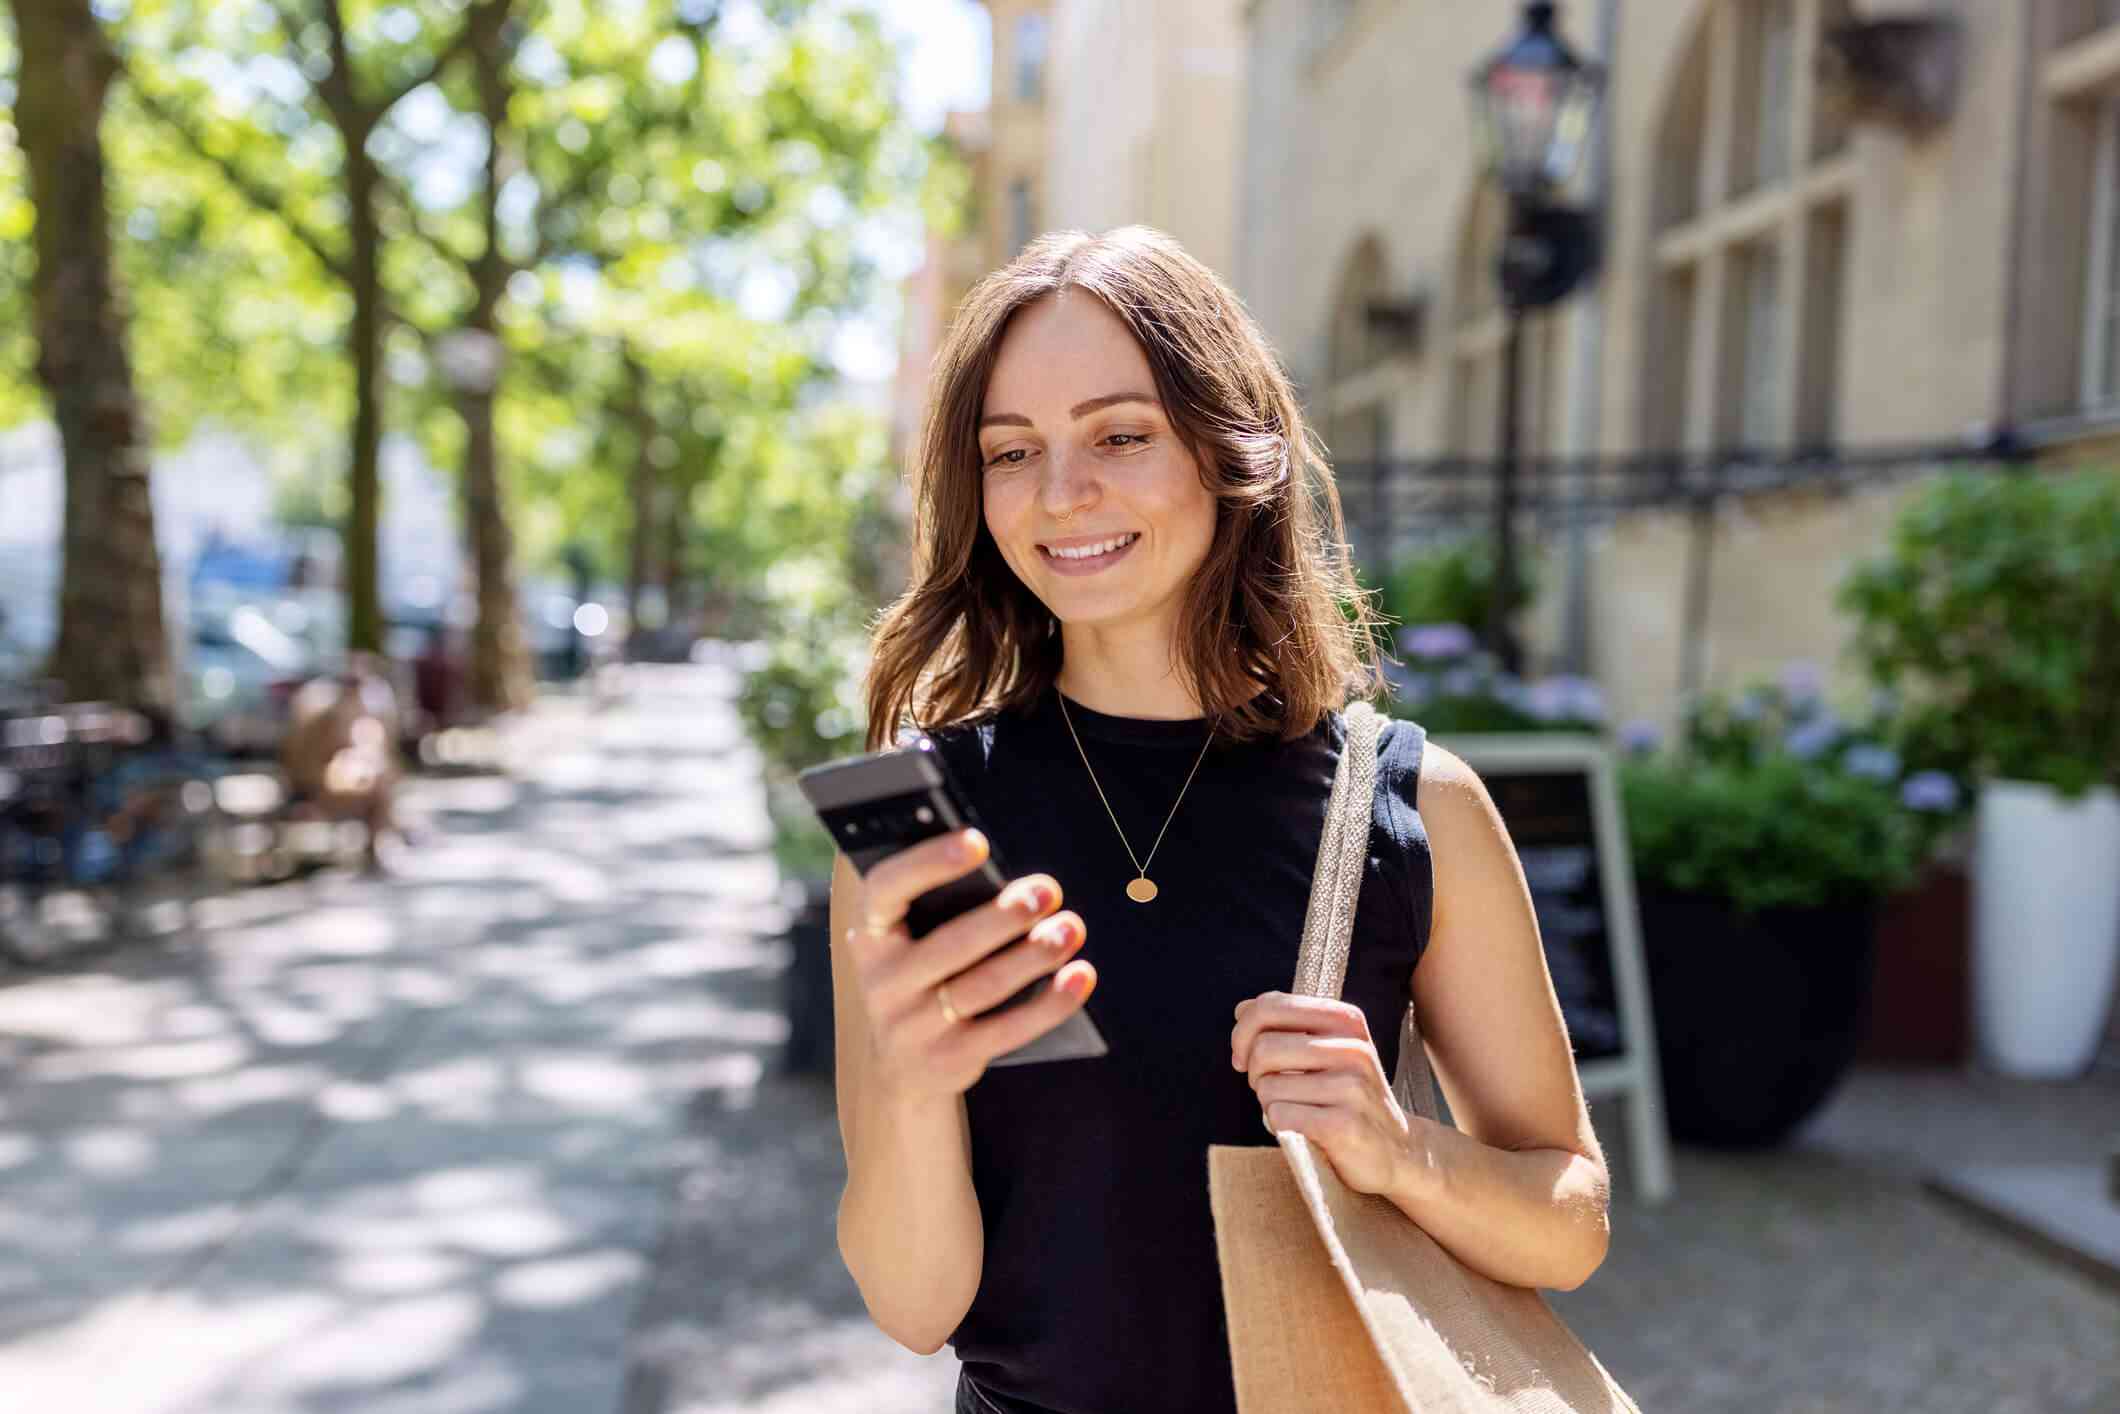 A woman in a black shirt stands otuside and smiles down at her phone in her hand on a sunny day.